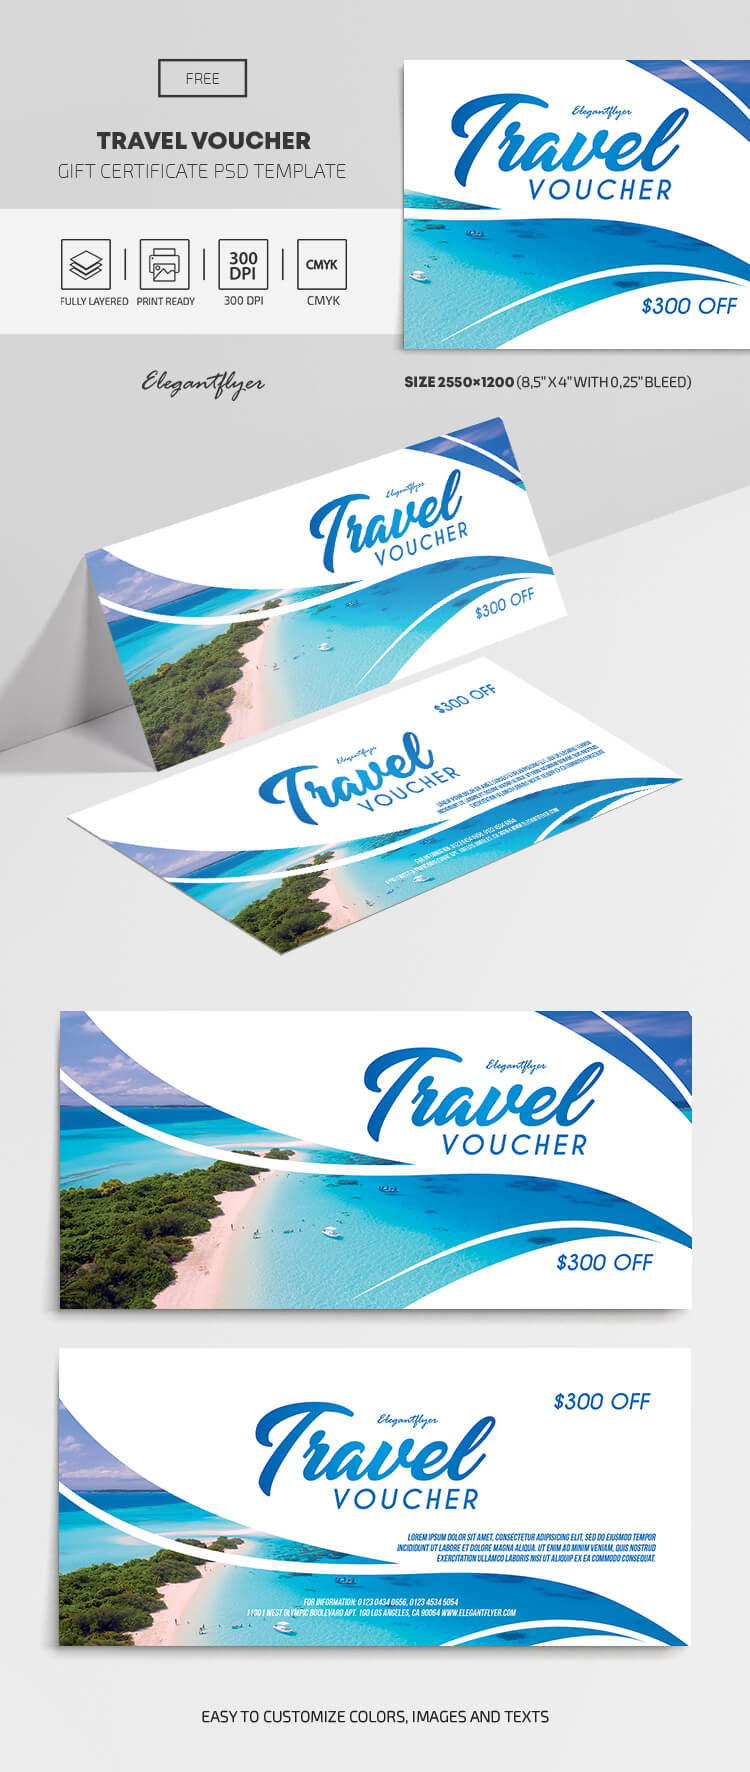 Travel Voucher – Free Gift Certificate Template – Intended For Free Travel Gift Certificate Template